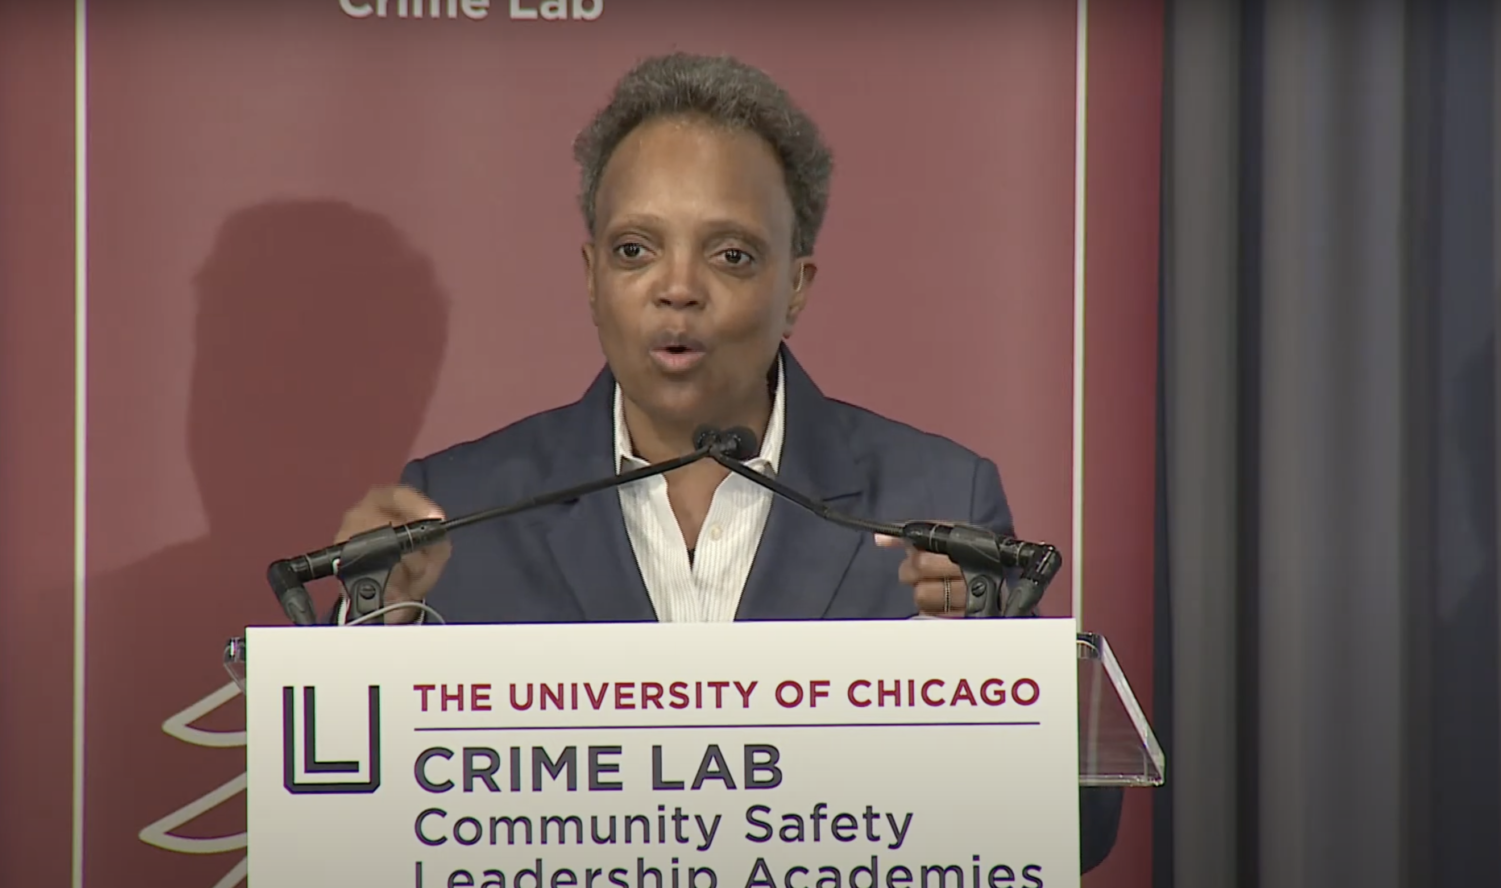 Chicago Mayor Lori Lightfoot talked during the event.